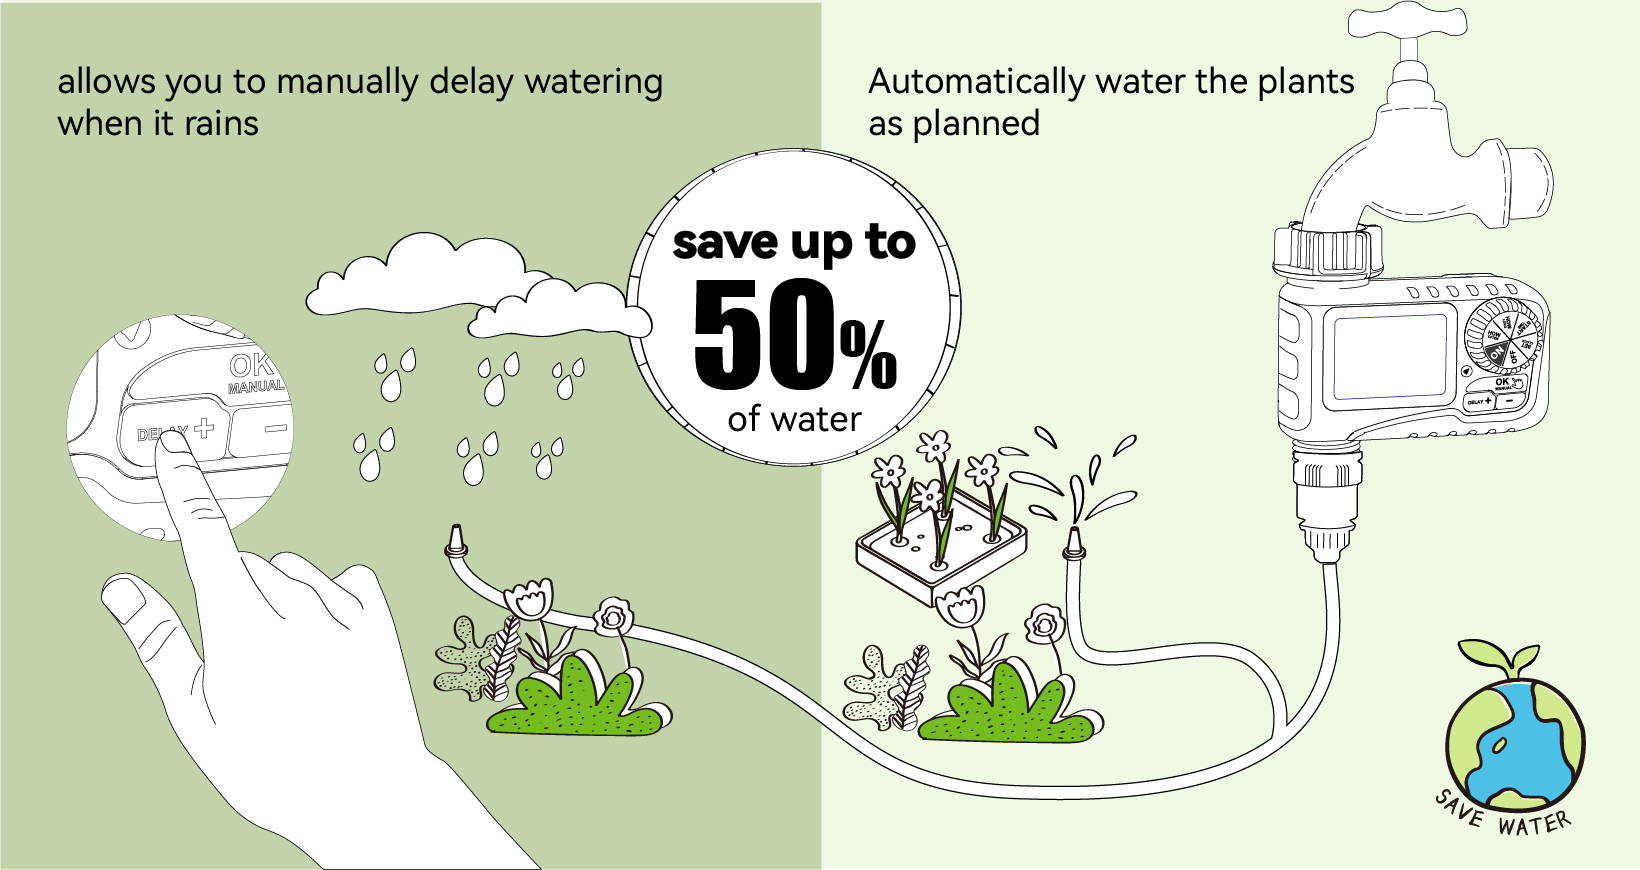 save up to 50% water